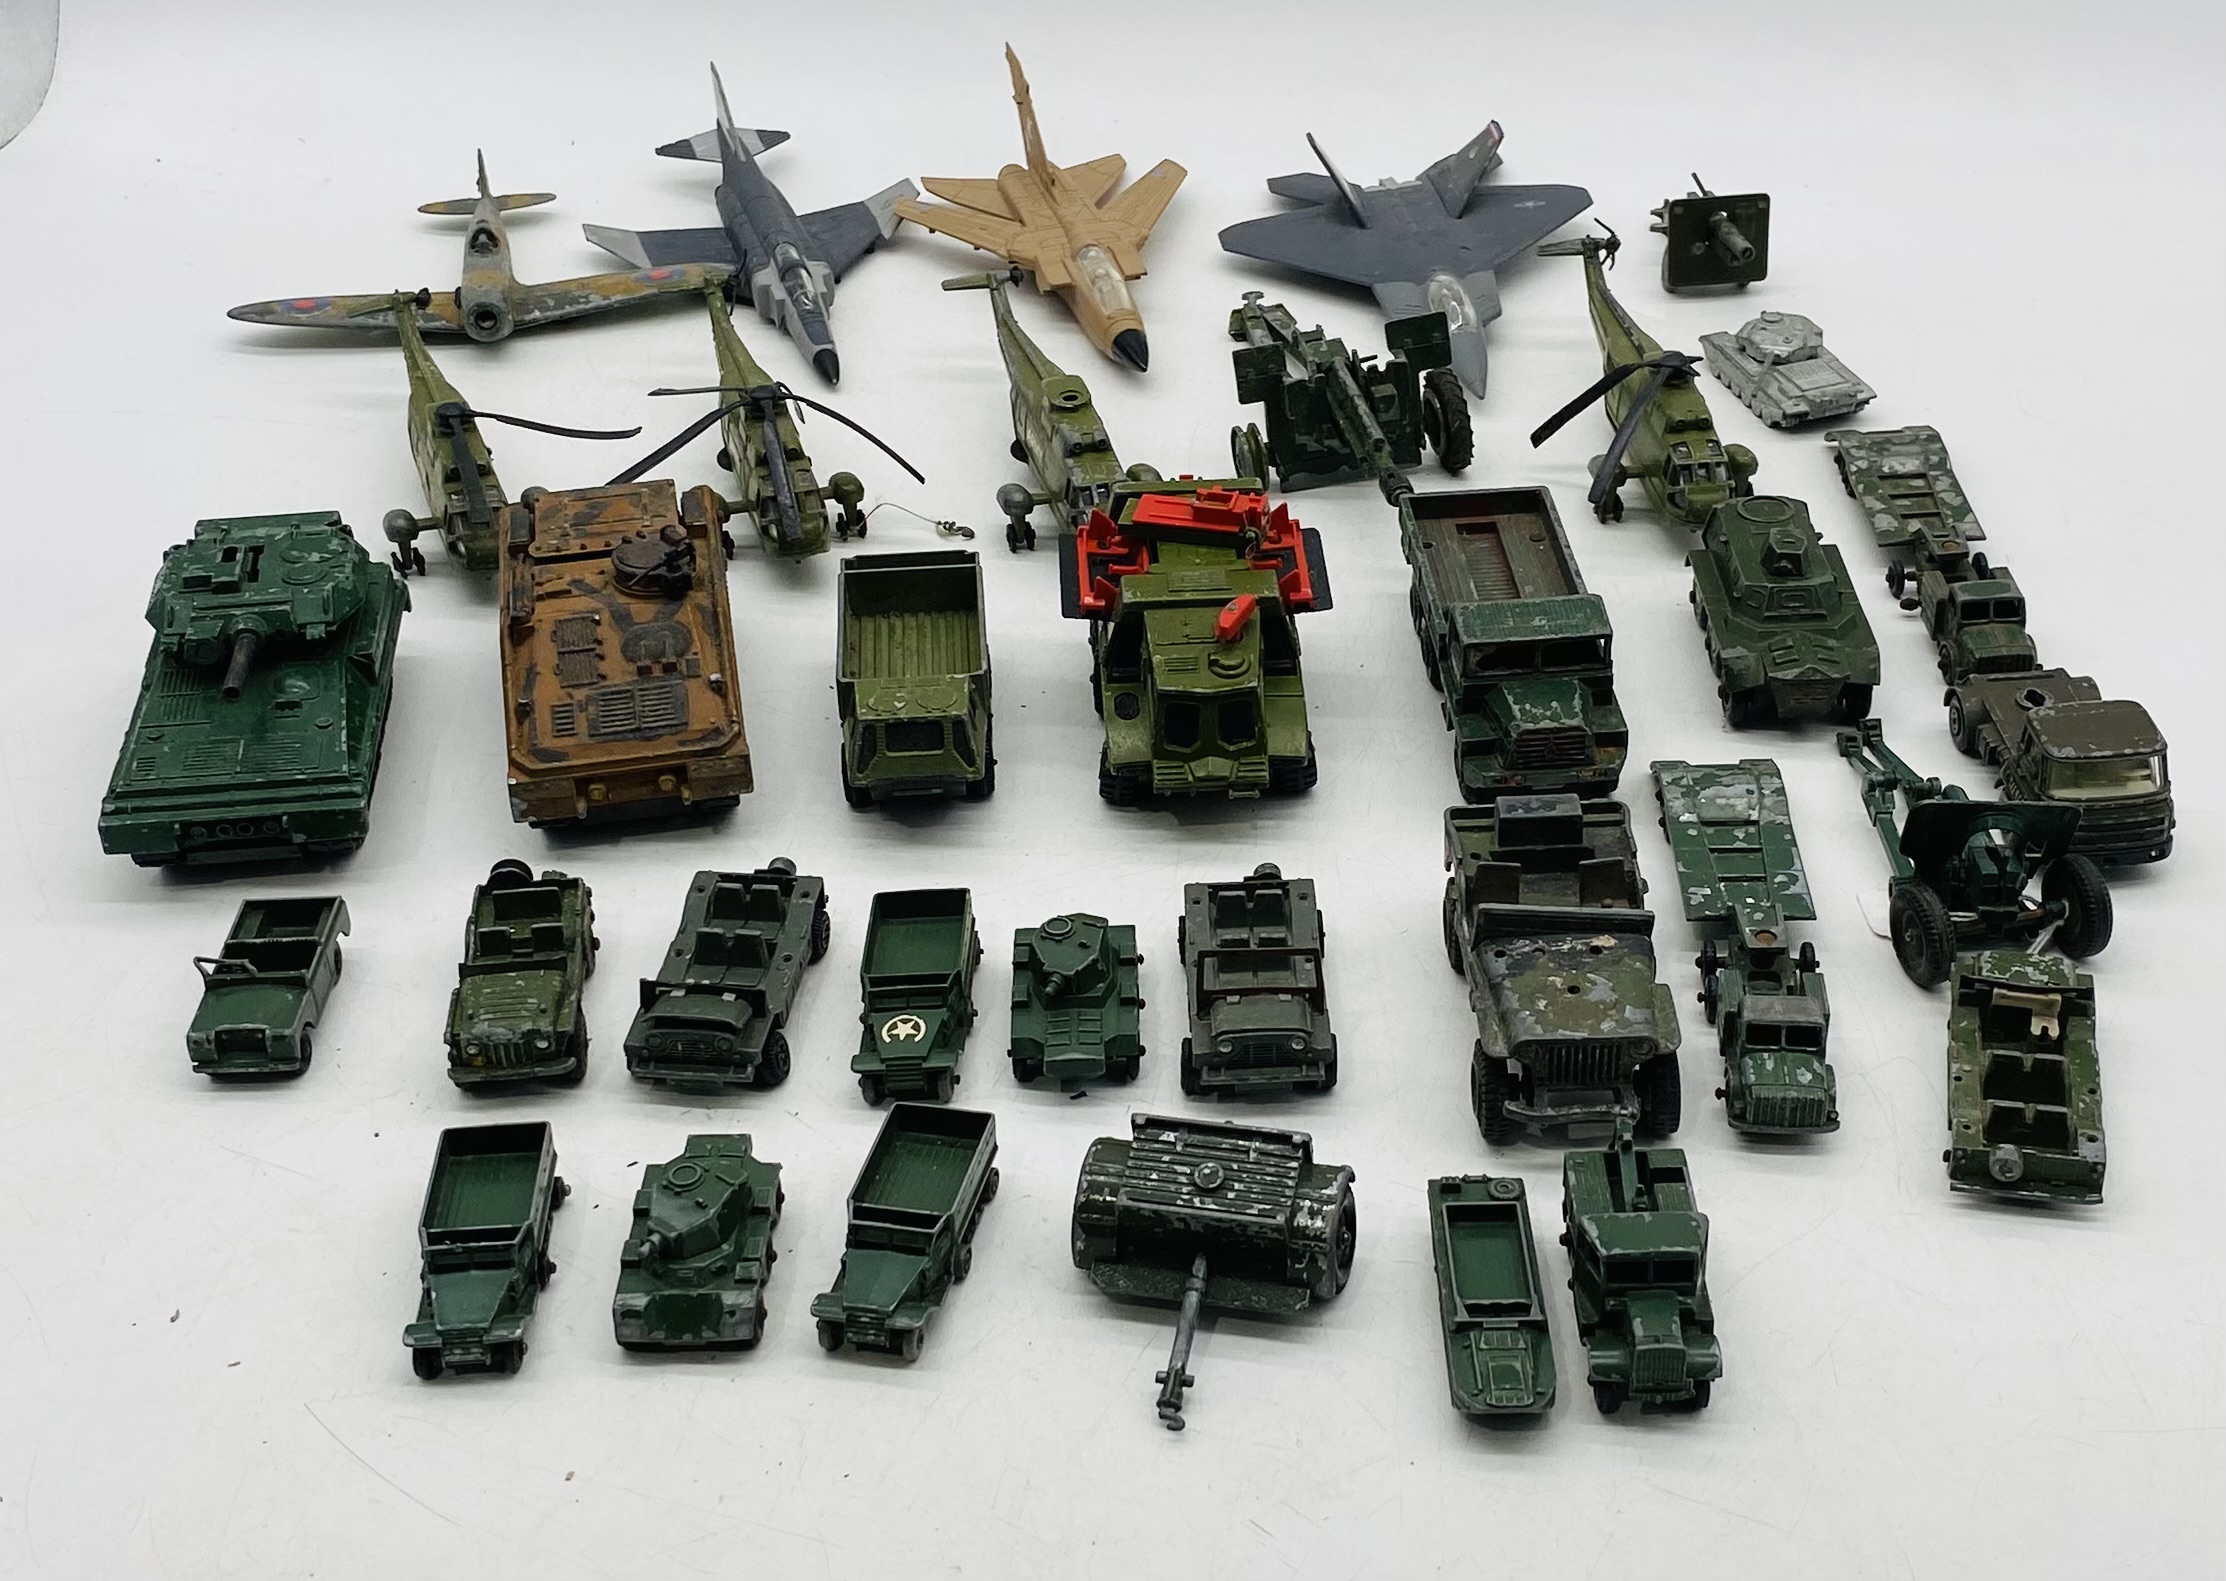 A collection of playworn die-cast military vehicles including tanks, helicopters, fighter jets, - Image 5 of 5